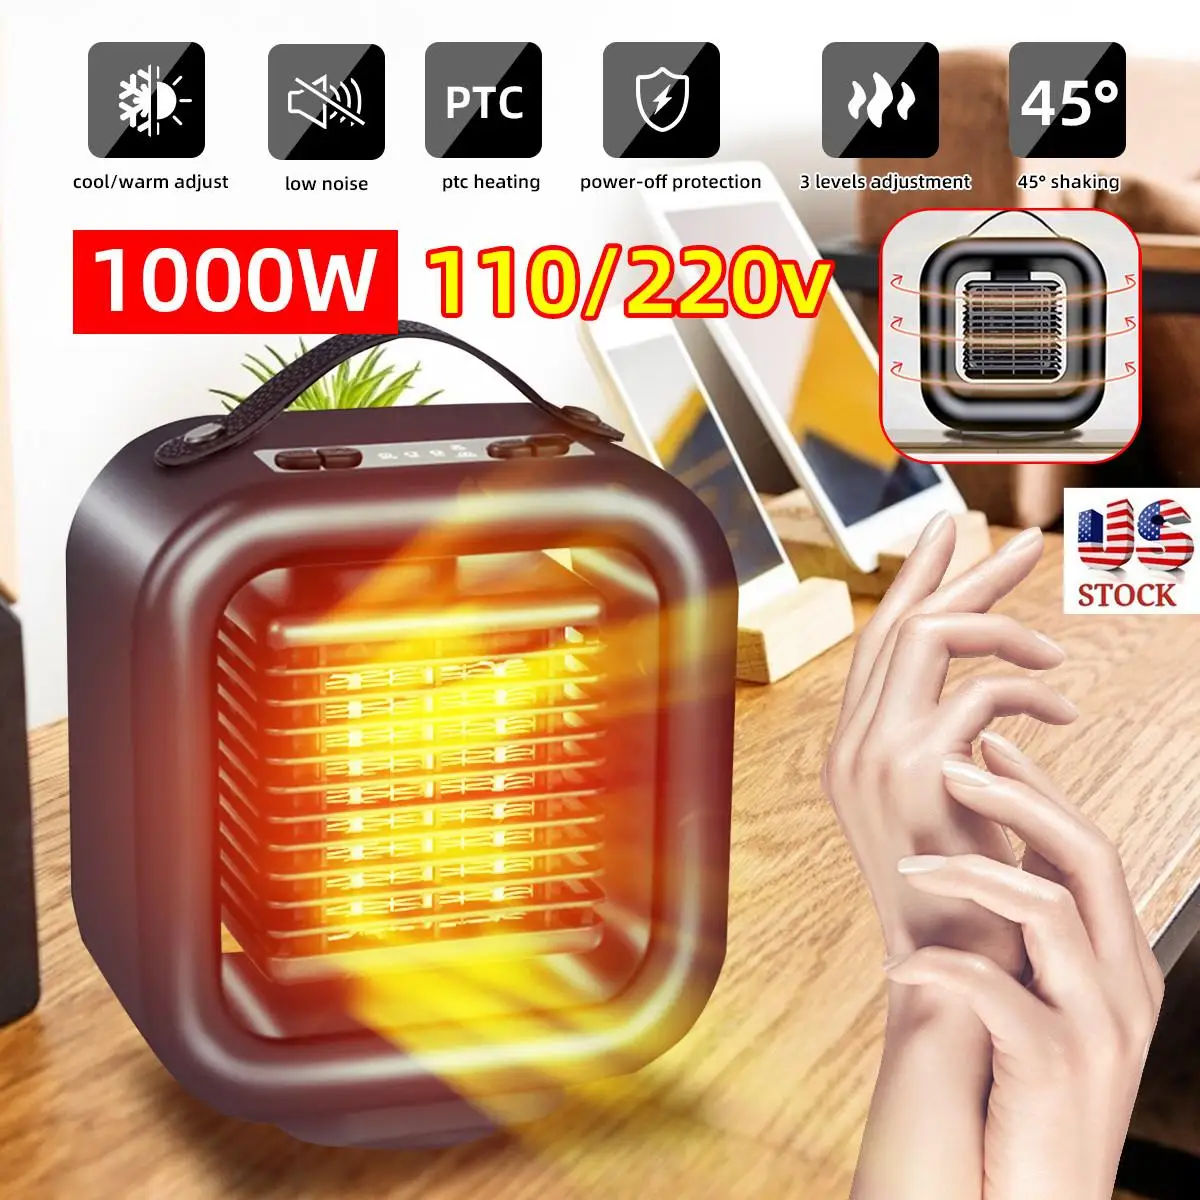 

1000W 3 Modes Fast Electric Heater Fan Mini Portable Heater Stove PTC Ceramic Warmer for Household Indoor Heating Camping US